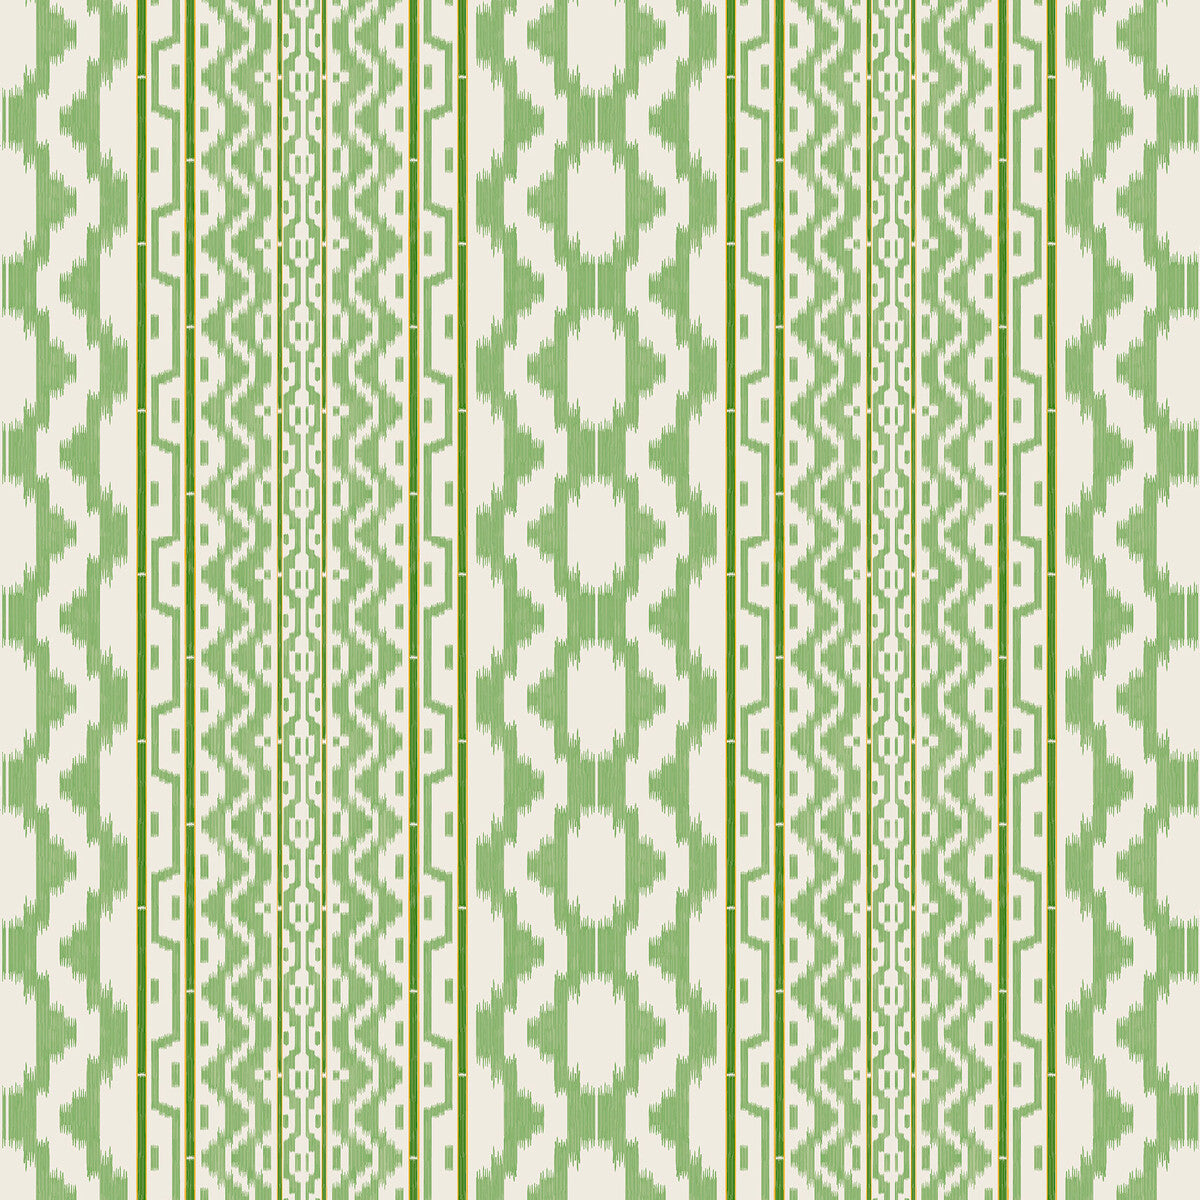 Cala Murada fabric in verde color - pattern GDT5682.006.0 - by Gaston y Daniela in the Gaston Maiorica collection